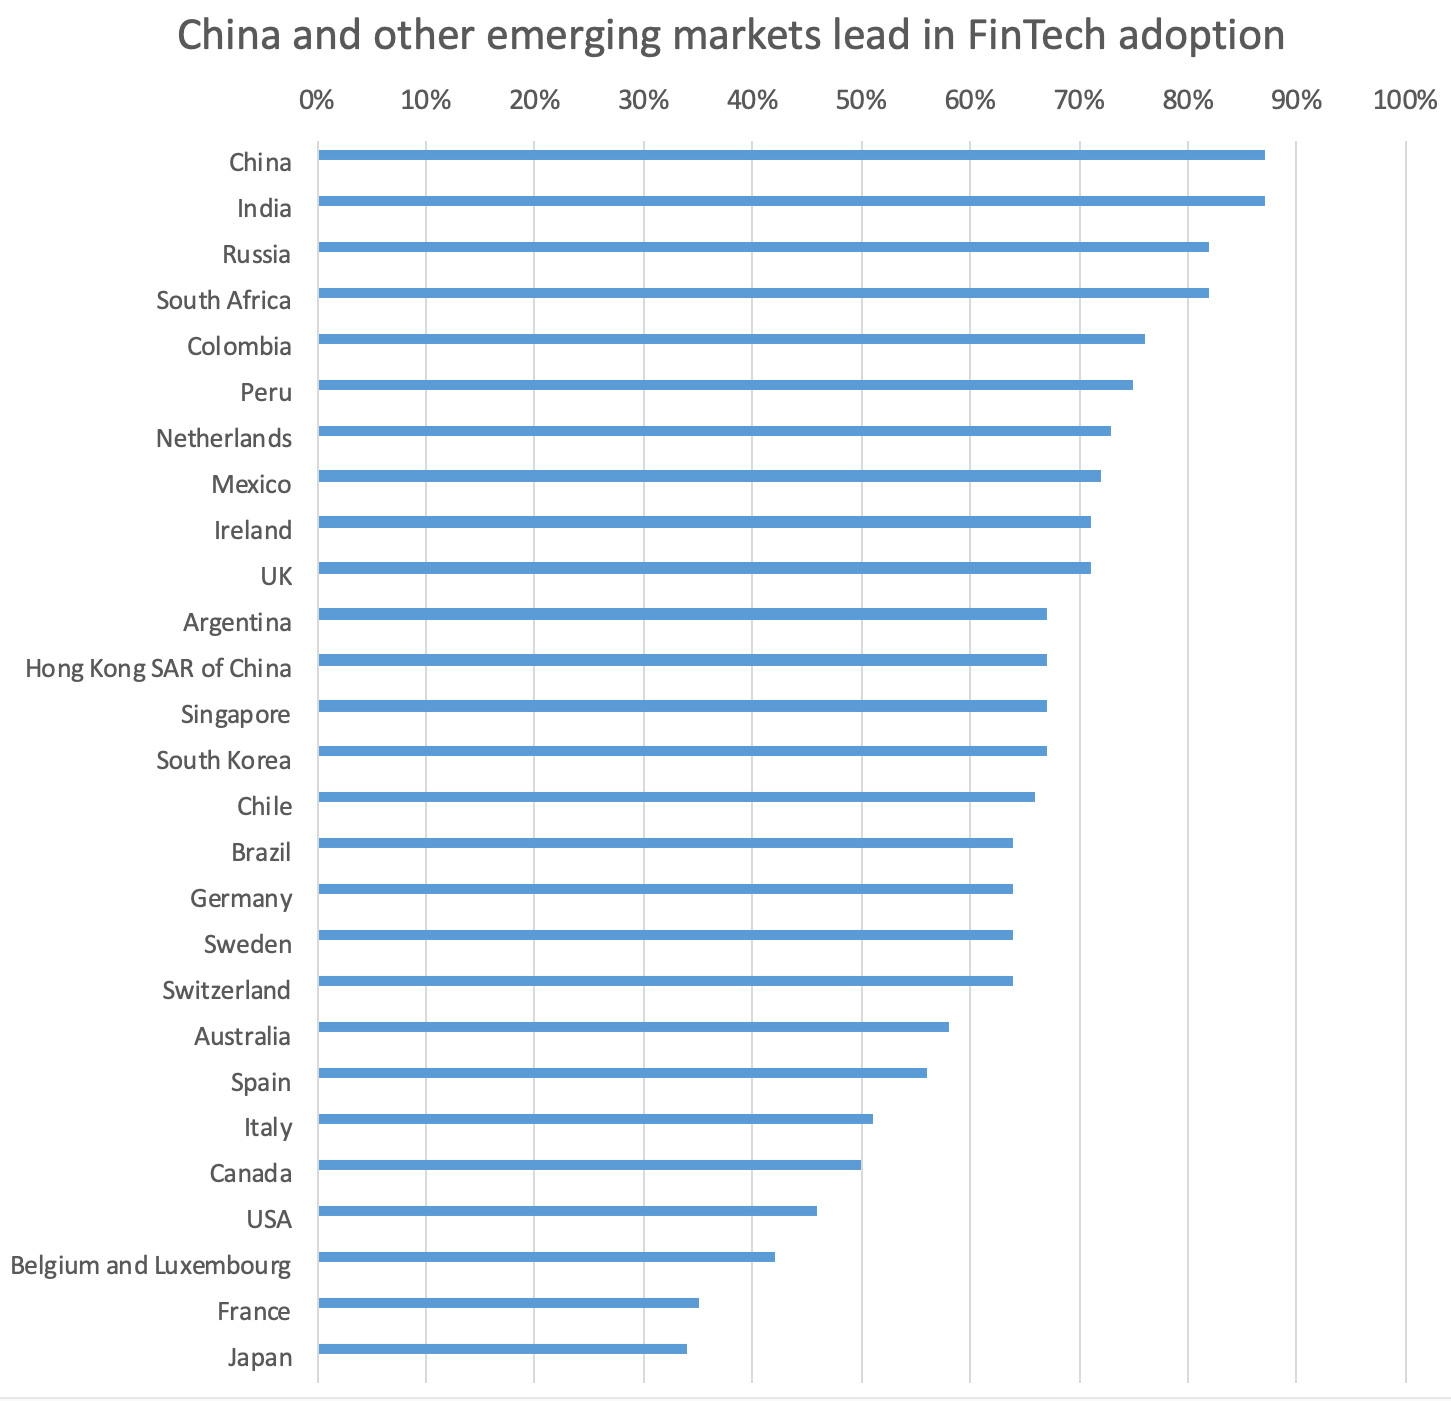 China leads in Fintech adoption